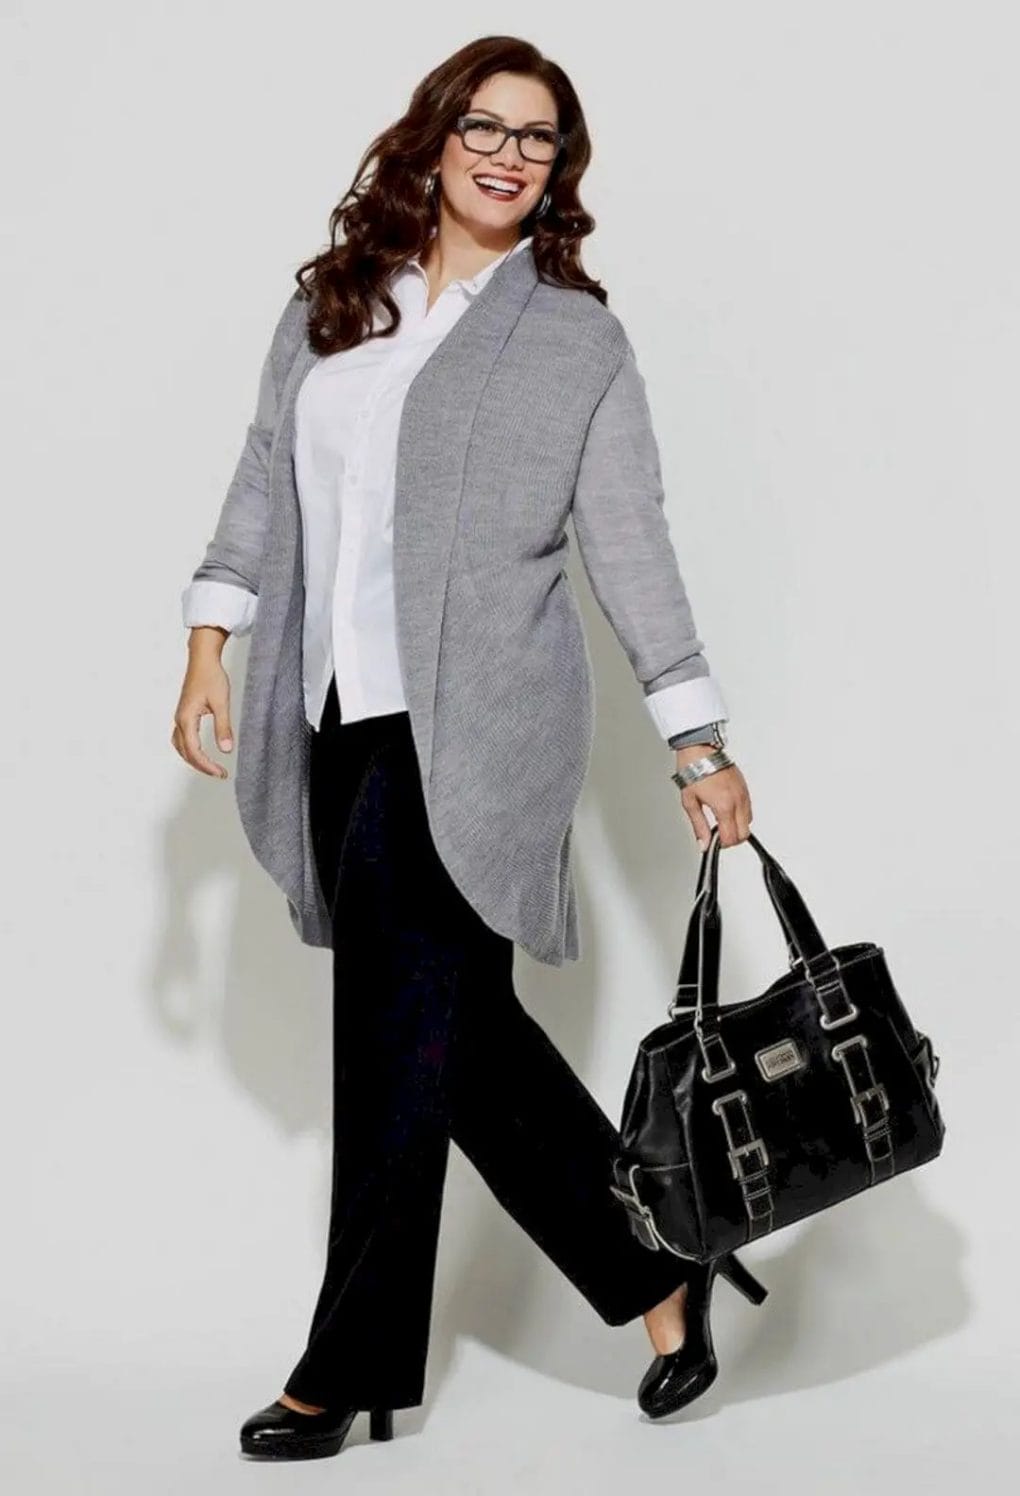 Go ahead and check our best options for the best business clothes for plus size ladies. For more business clothing ideas go to snazzylair.com